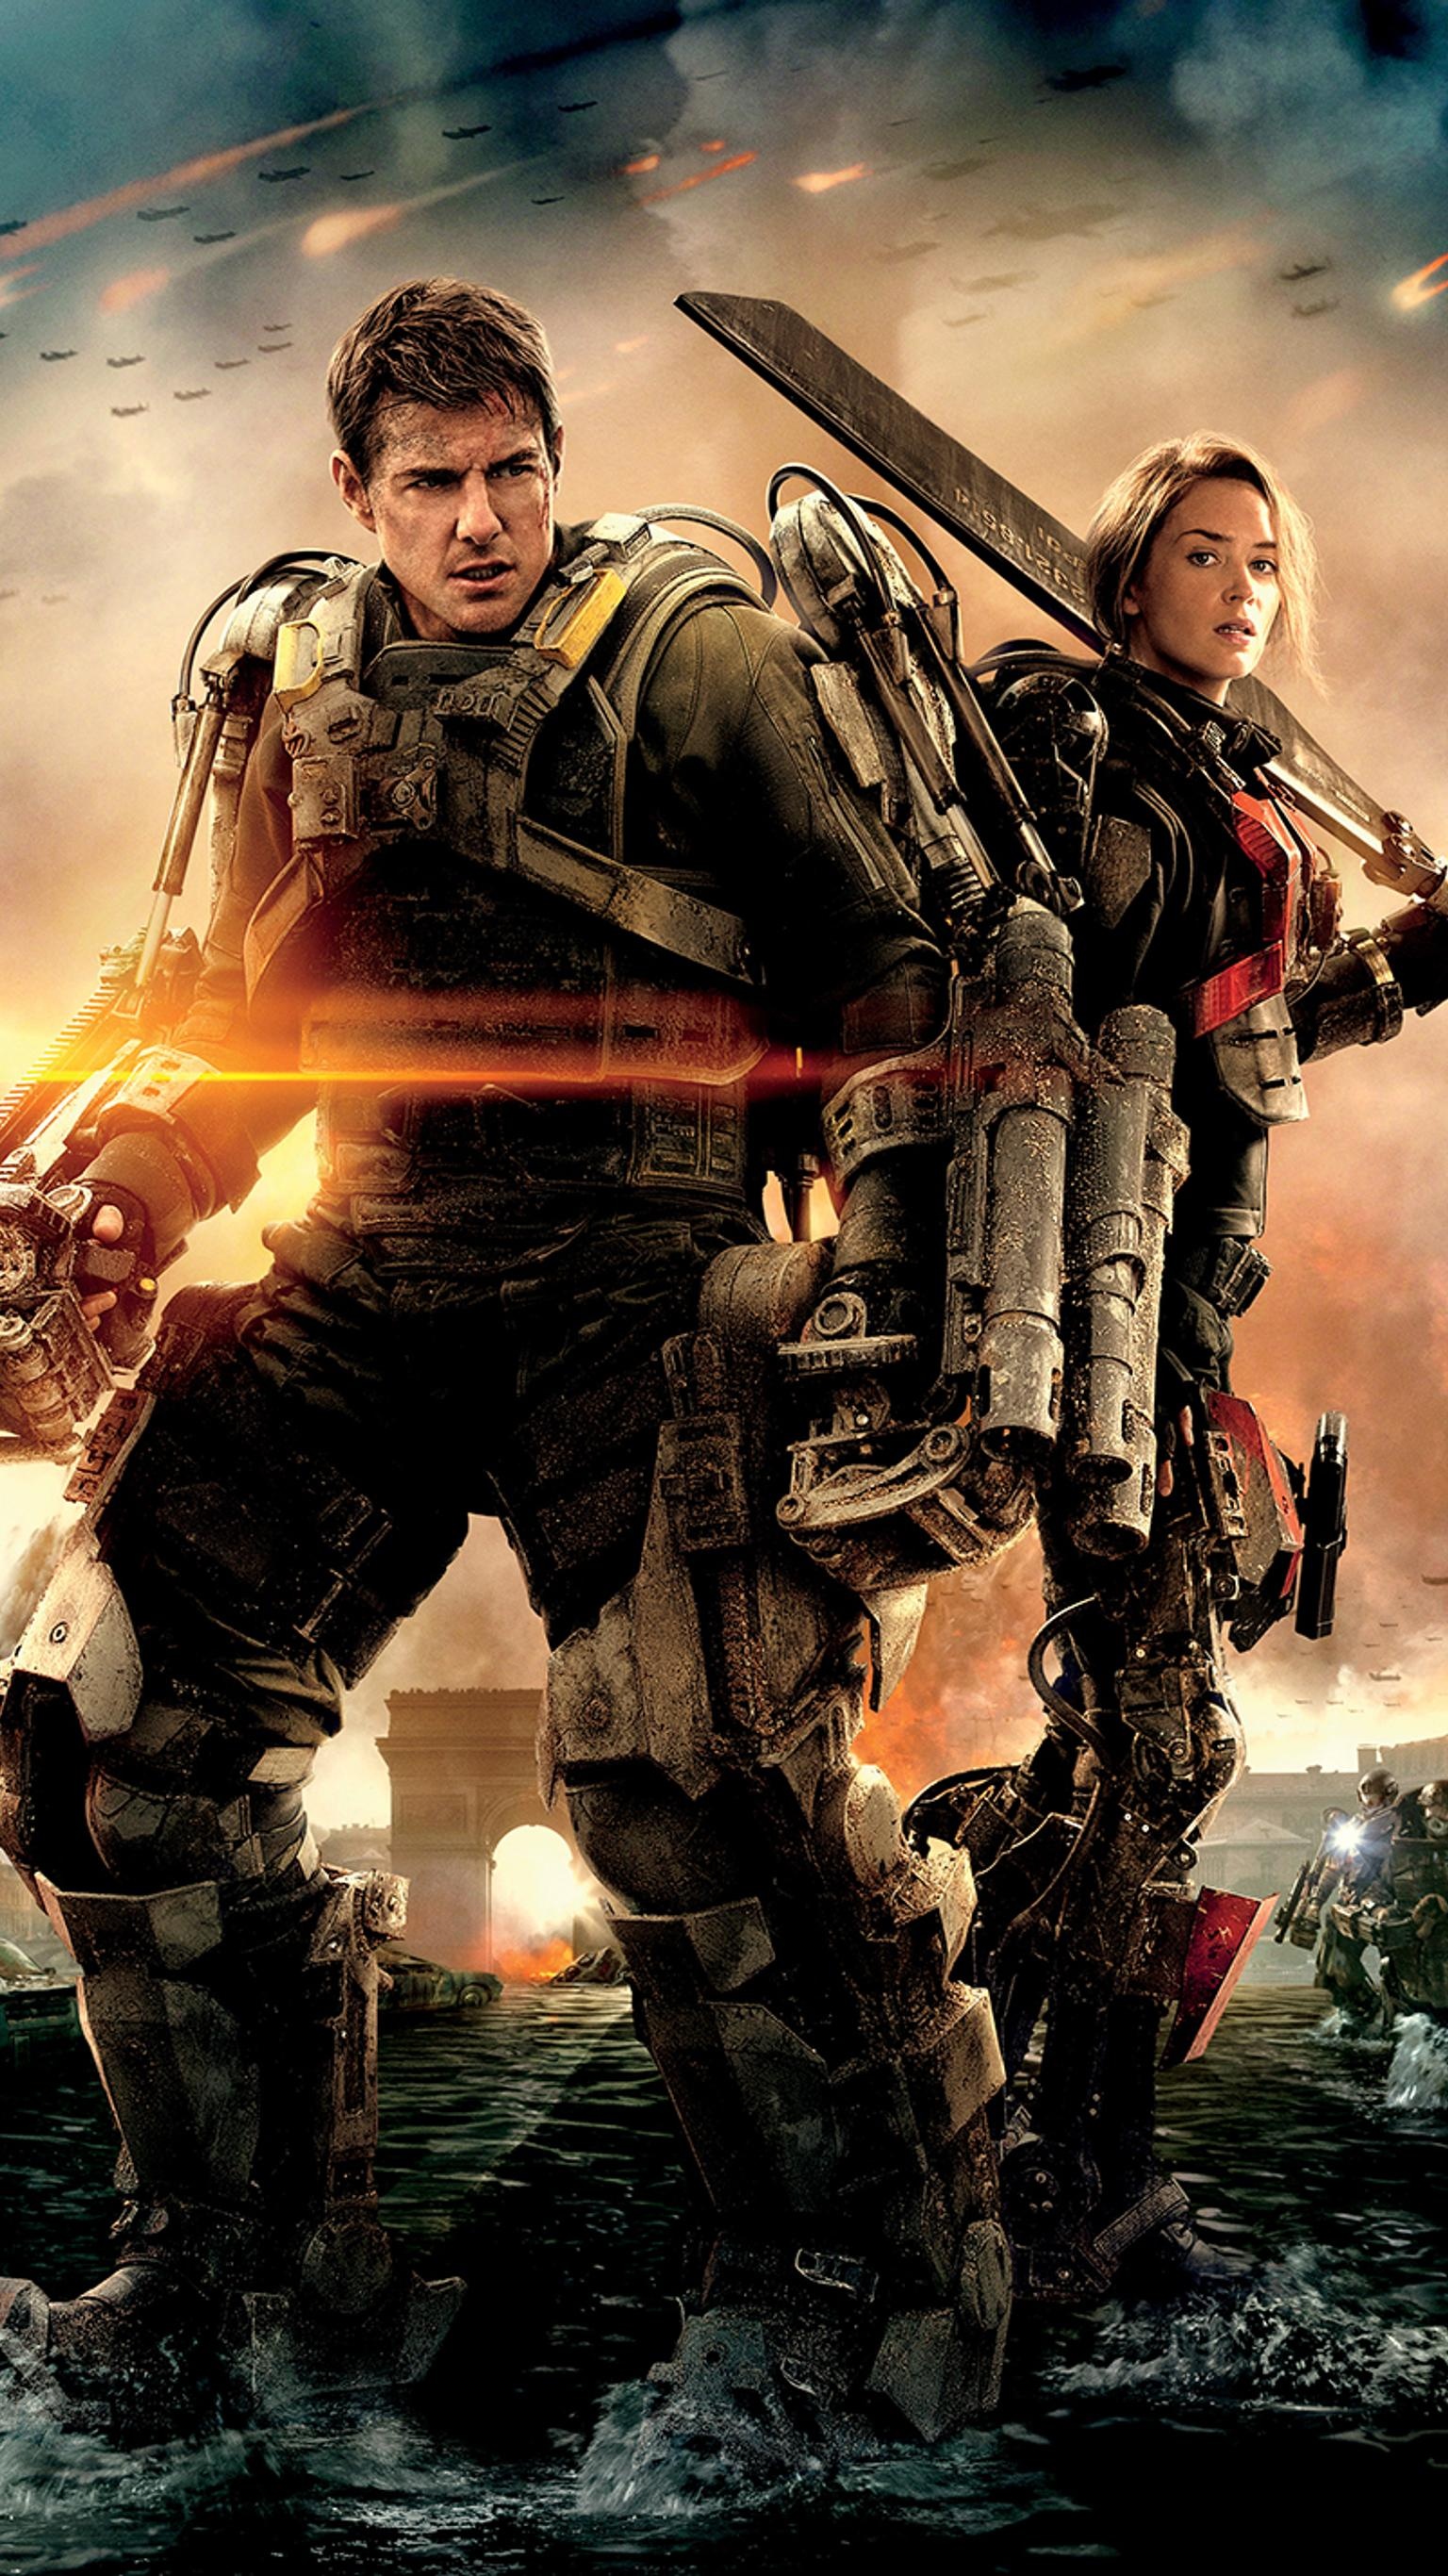 Edge of Tomorrow: A soldier in an alien war gets caught in a time loop, Movie plot. 1540x2740 HD Wallpaper.